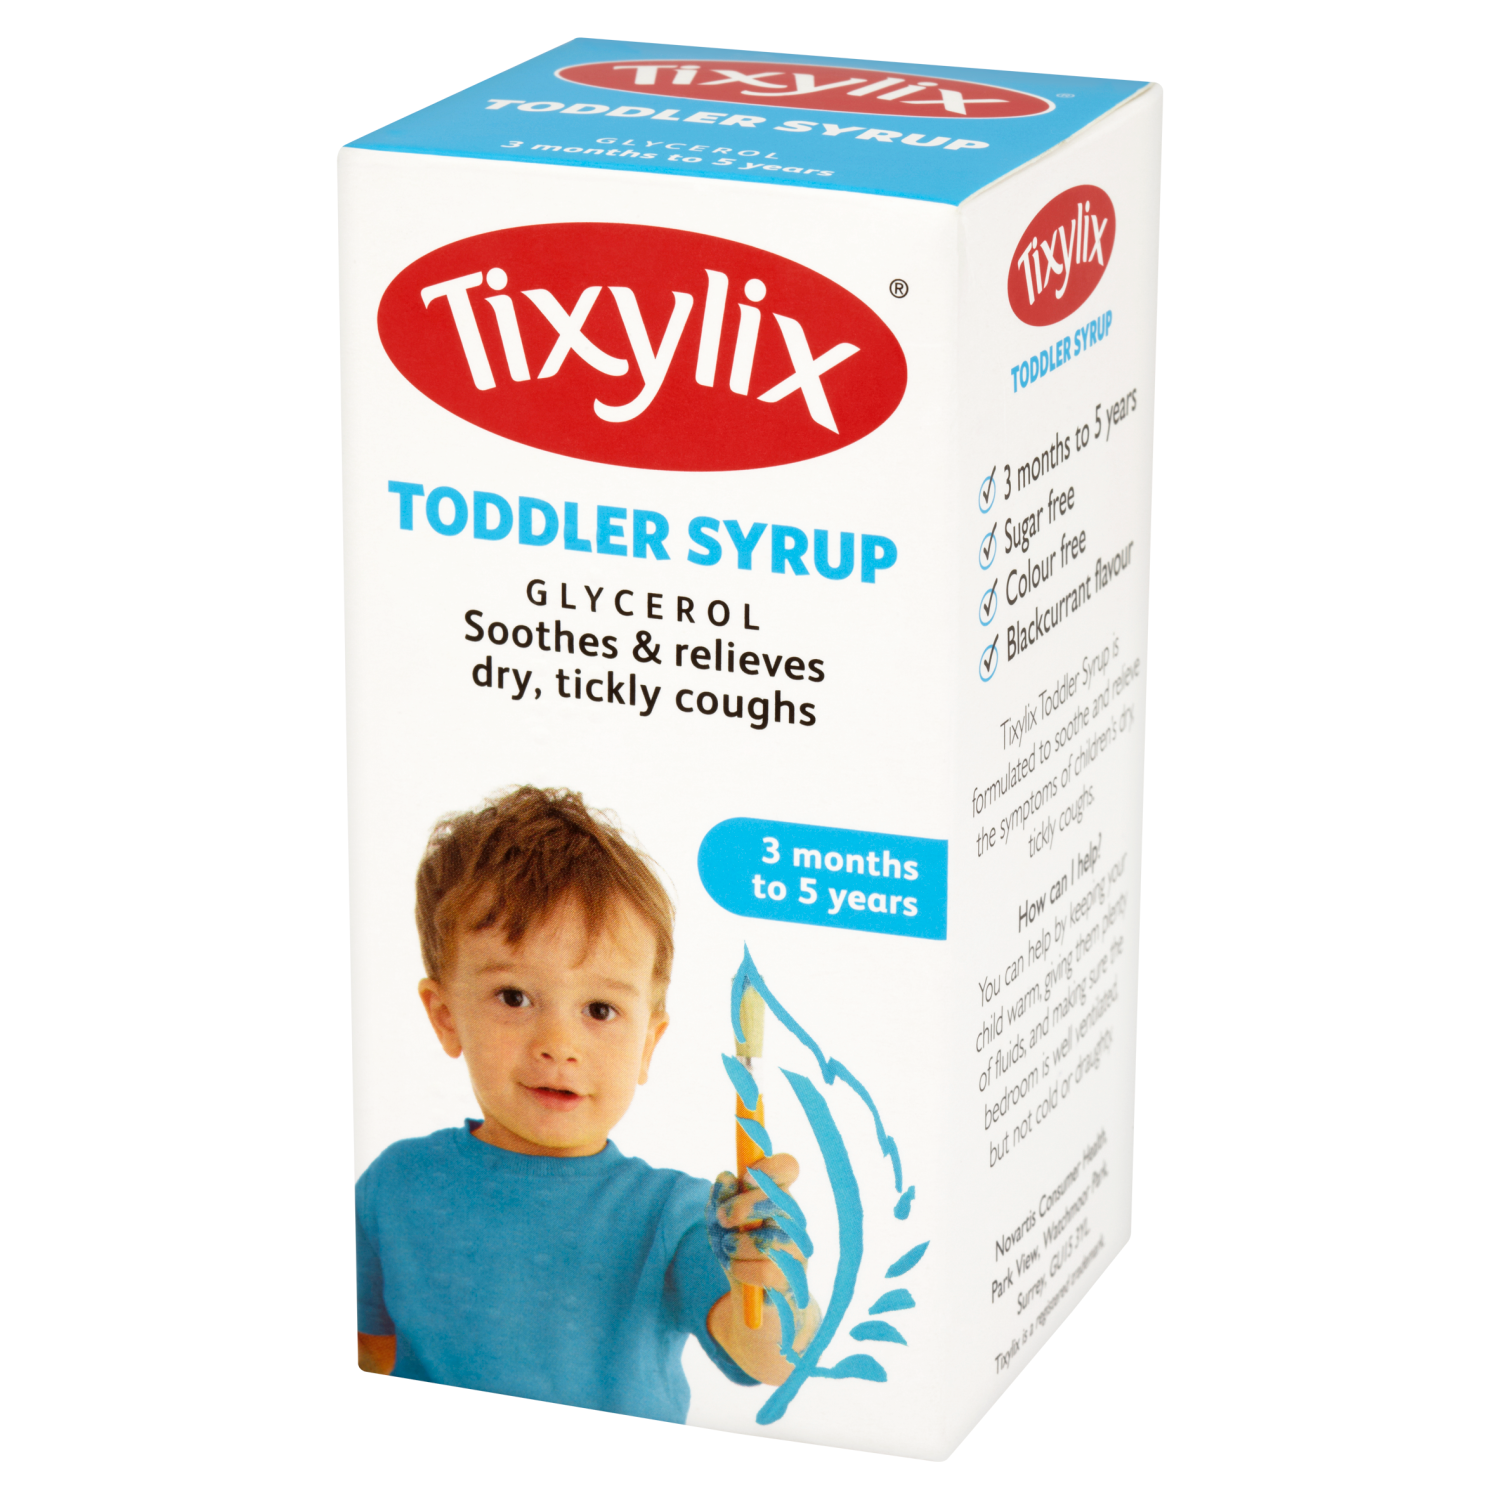 Tixylix Glycerol Toddler Syrup 3 Months to 5 Years 100ml